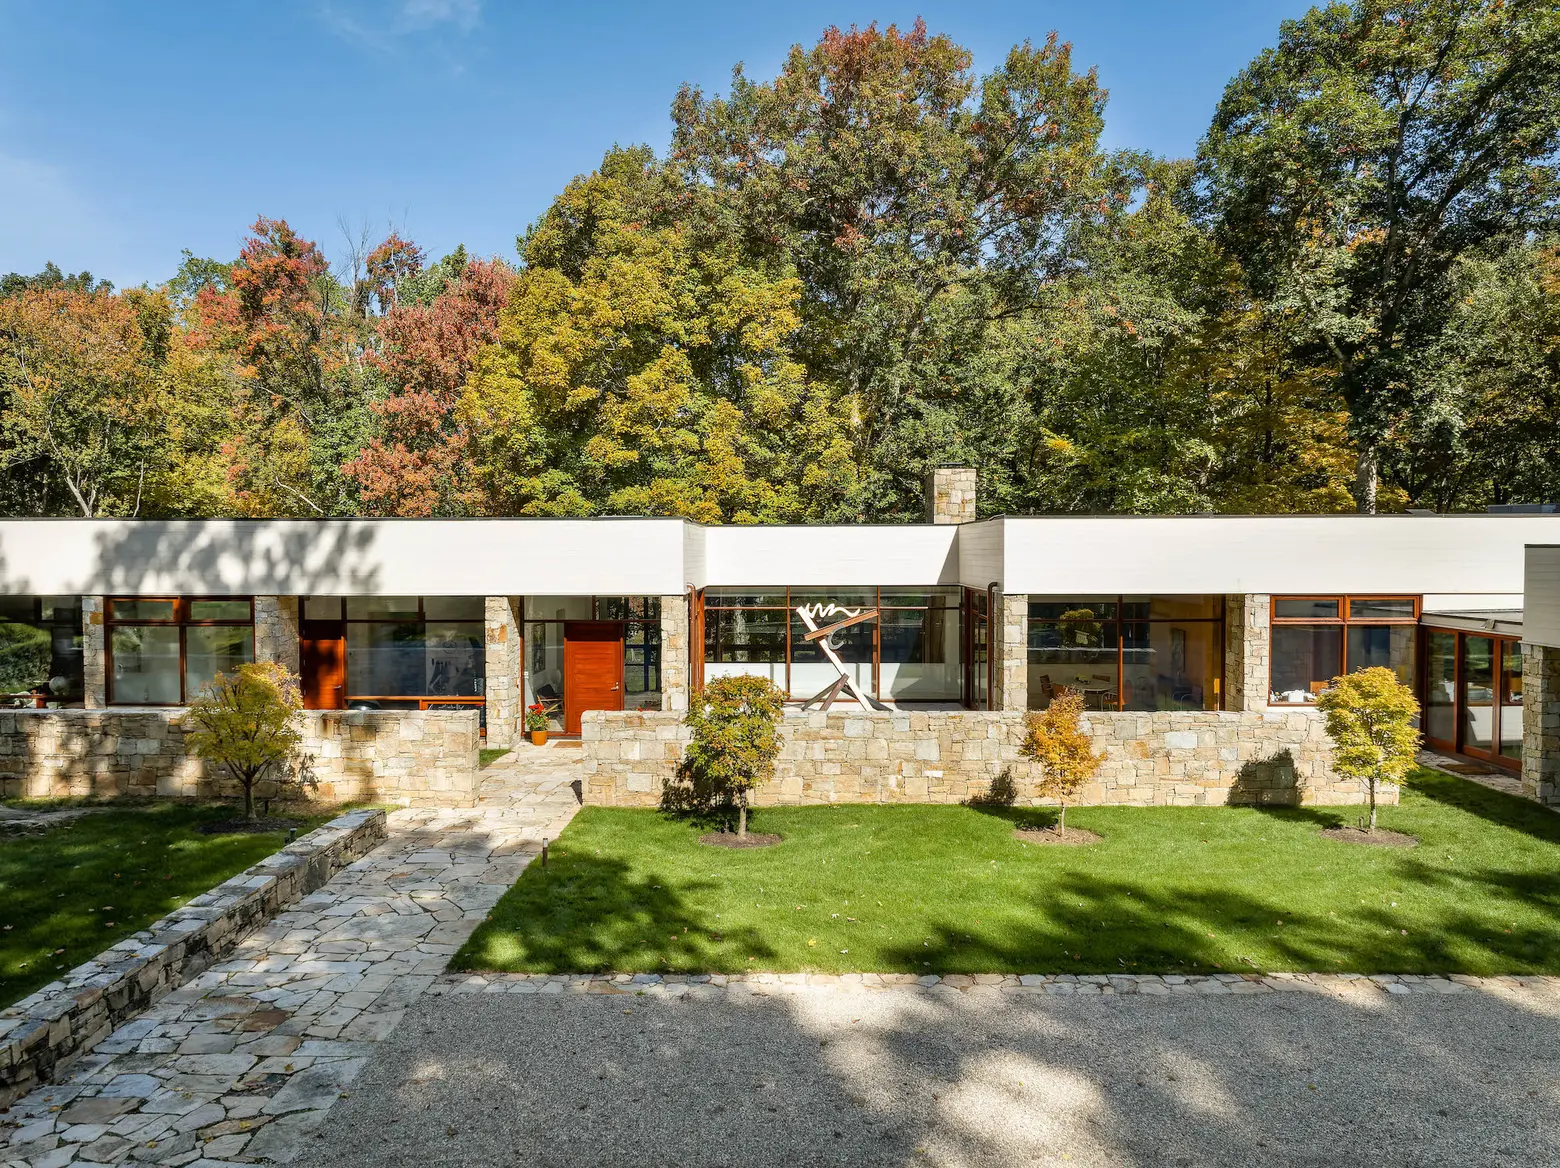 This iconic modern home in Westchester, surrounded by natural beauty, asks $6M